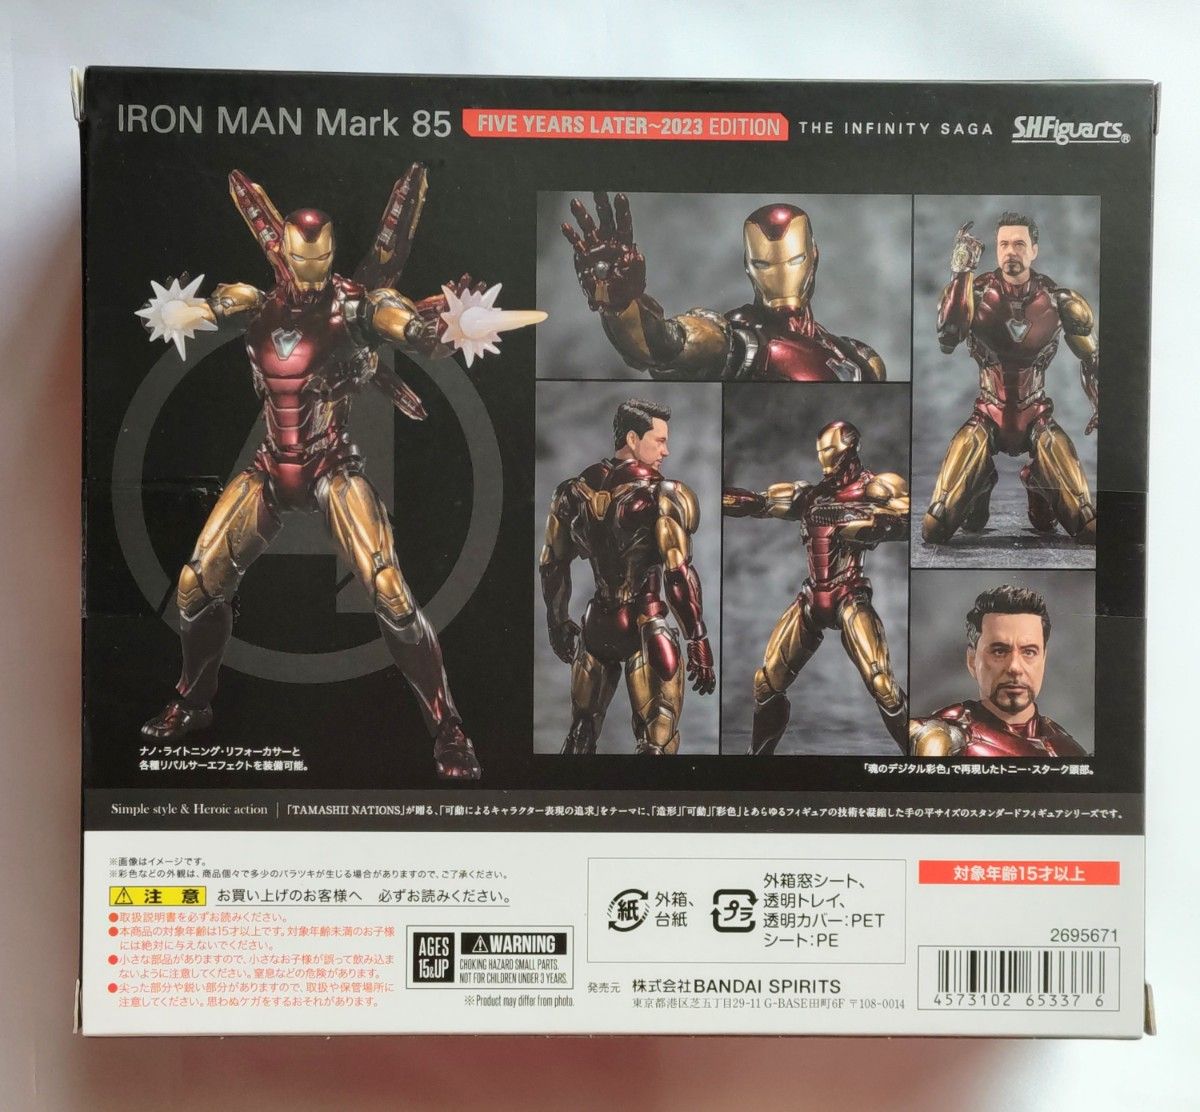 S.H.Figuarts アイアンマンマーク85《FIVE YEARS LATER～2023》(THE INFINITY SAGA